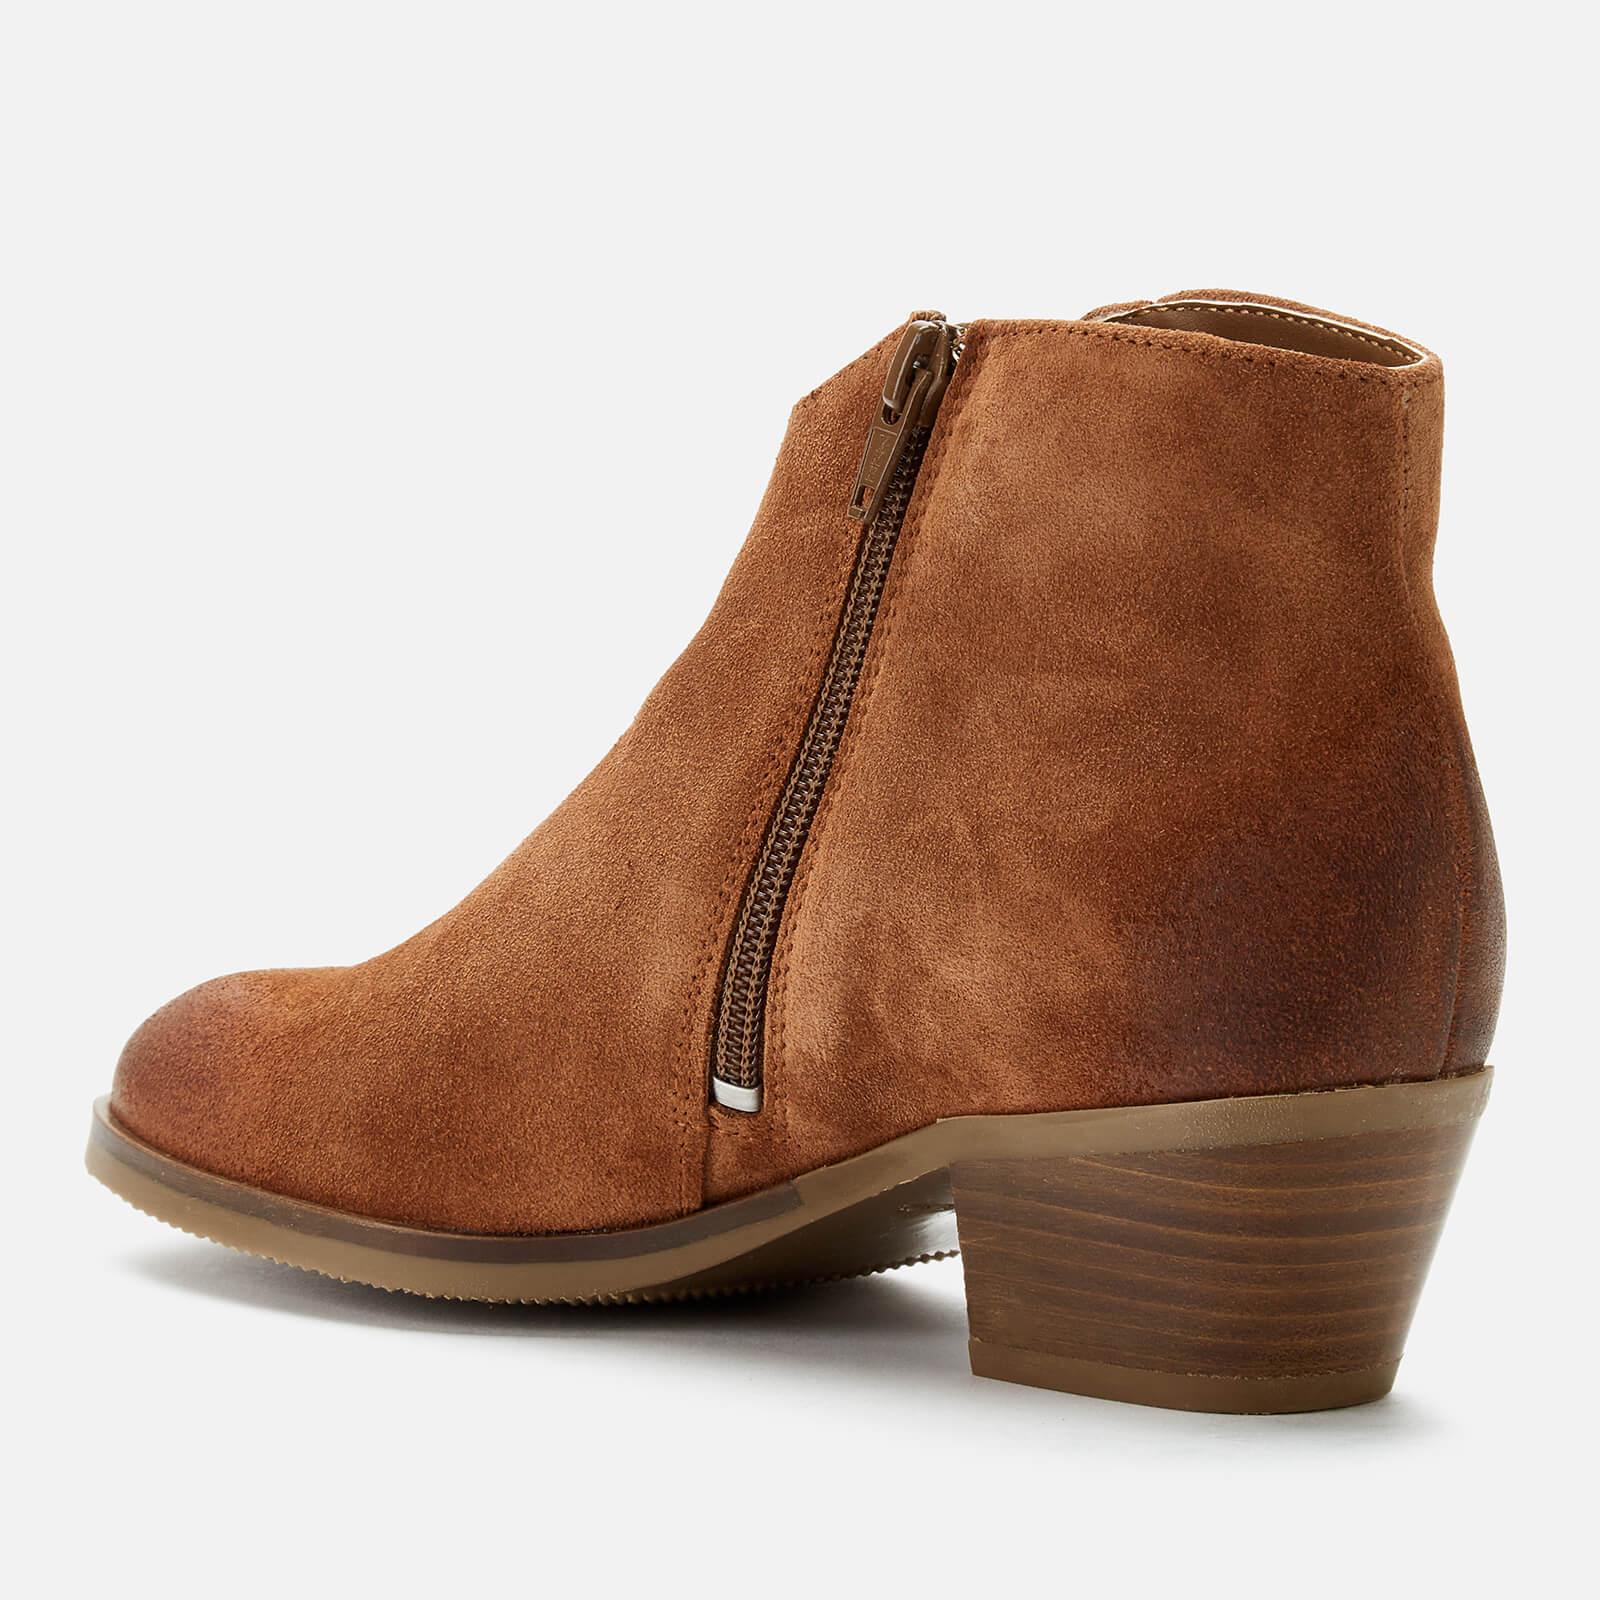 Clarks Mila Myth Suede Heeled Ankle Boots in Brown | Lyst